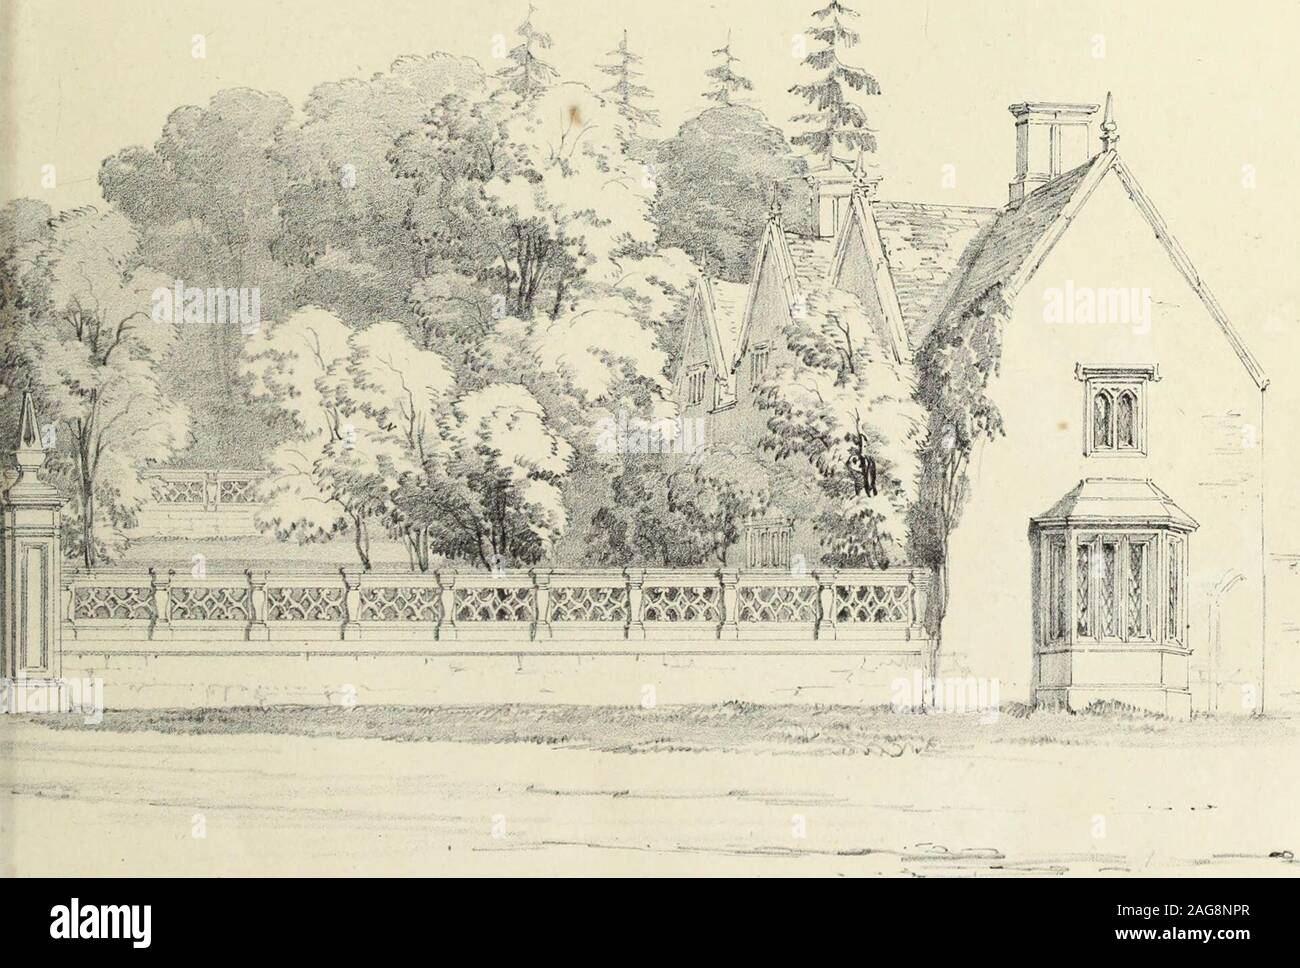 . Observations on the architecture of England during the reigns of Queen Elizabeth and King James I. & c. & c. L HagKe L iffc : THE SEAT OF O E :i Yie^vrof Entrance I. O.Moare DeJV . G /E TLTLA.K Egg*1(dfees .Lodge, fco Stock Photo